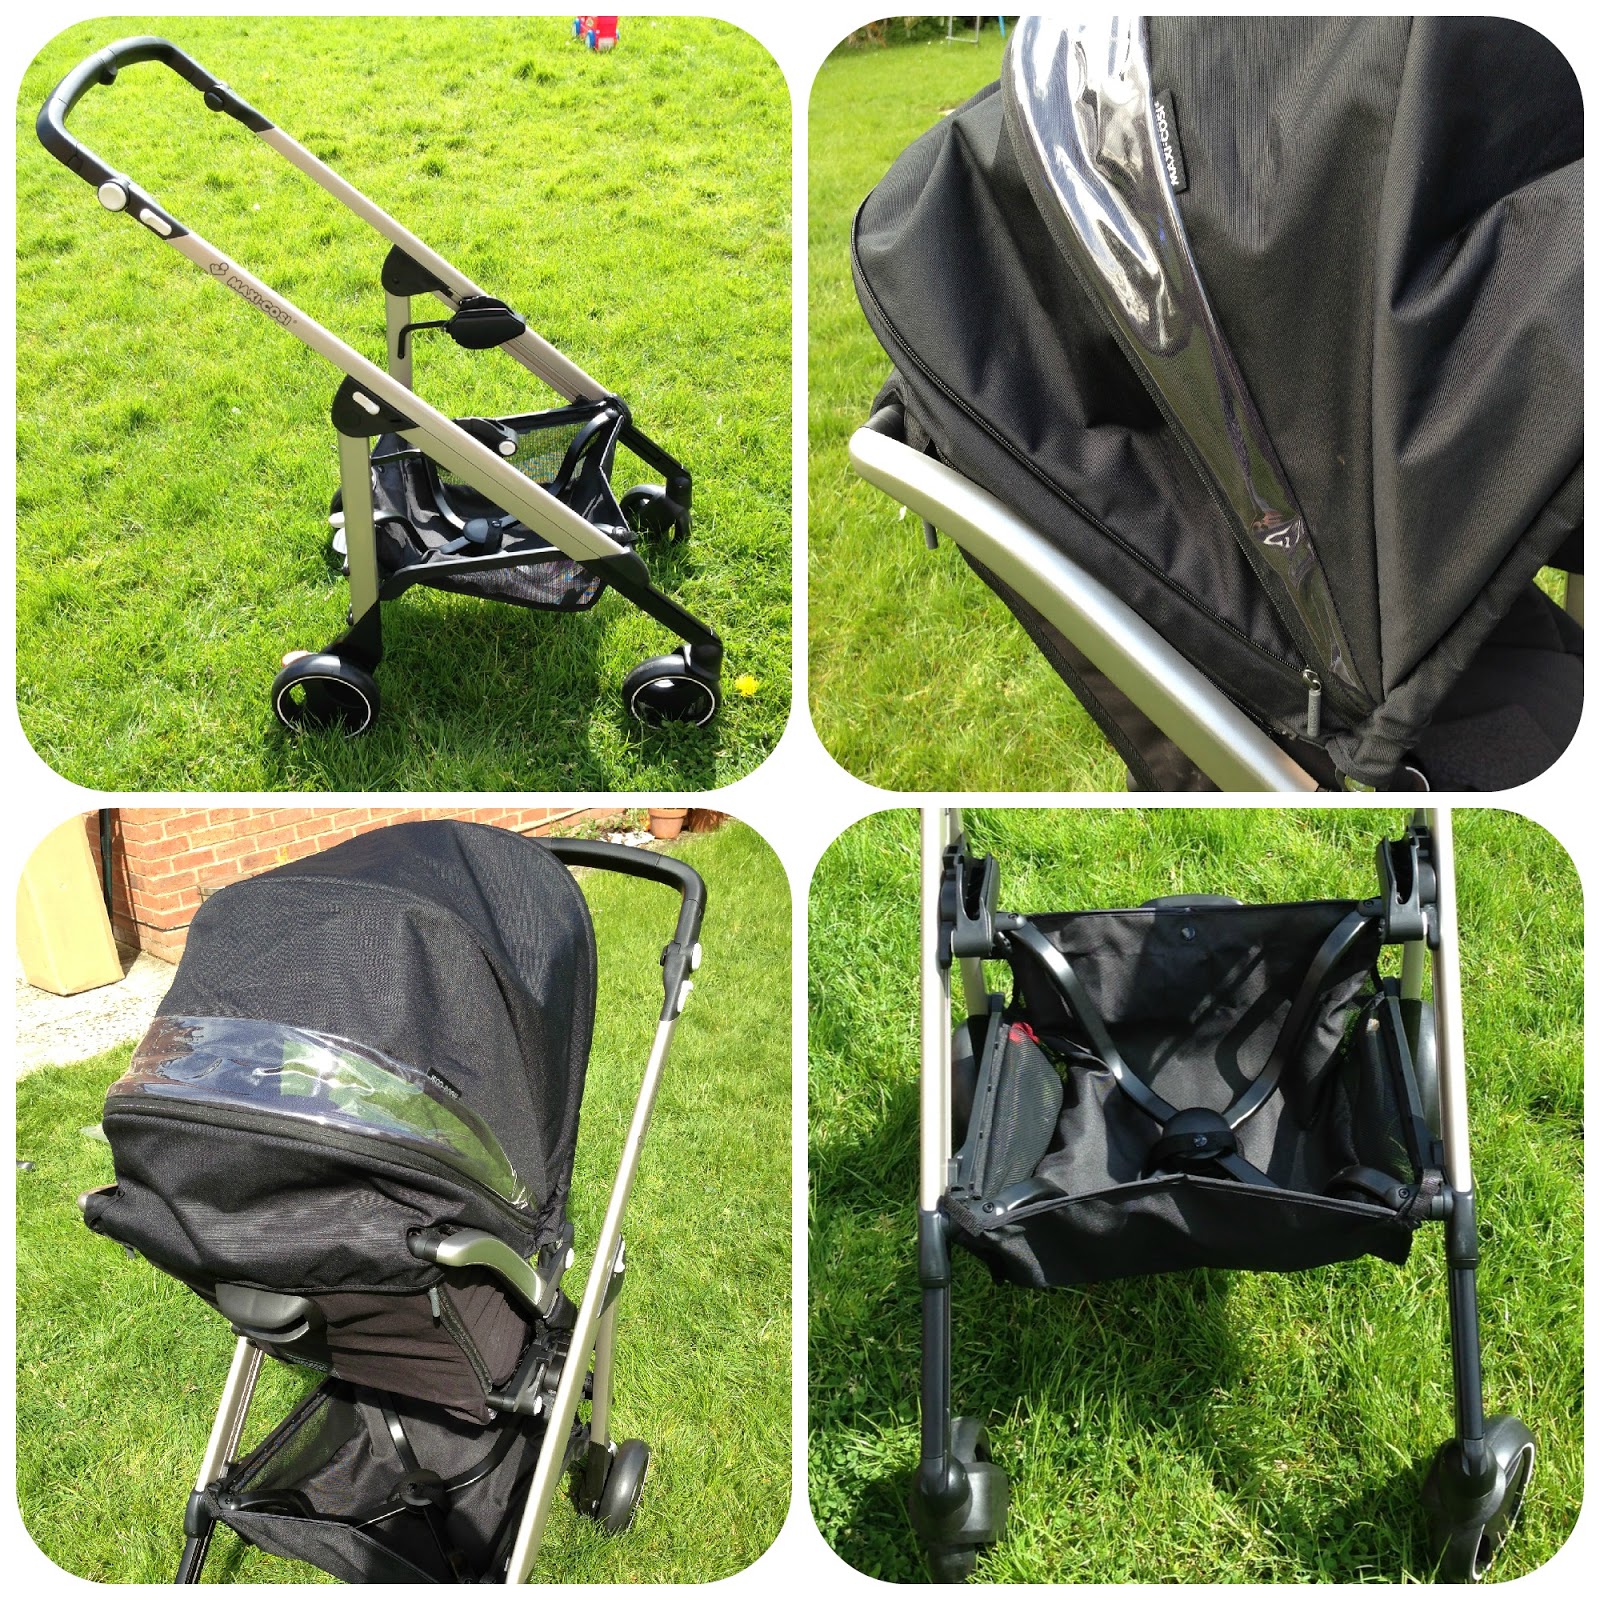 Life Unexpected: The Maxi Cosi Loola 2 Review